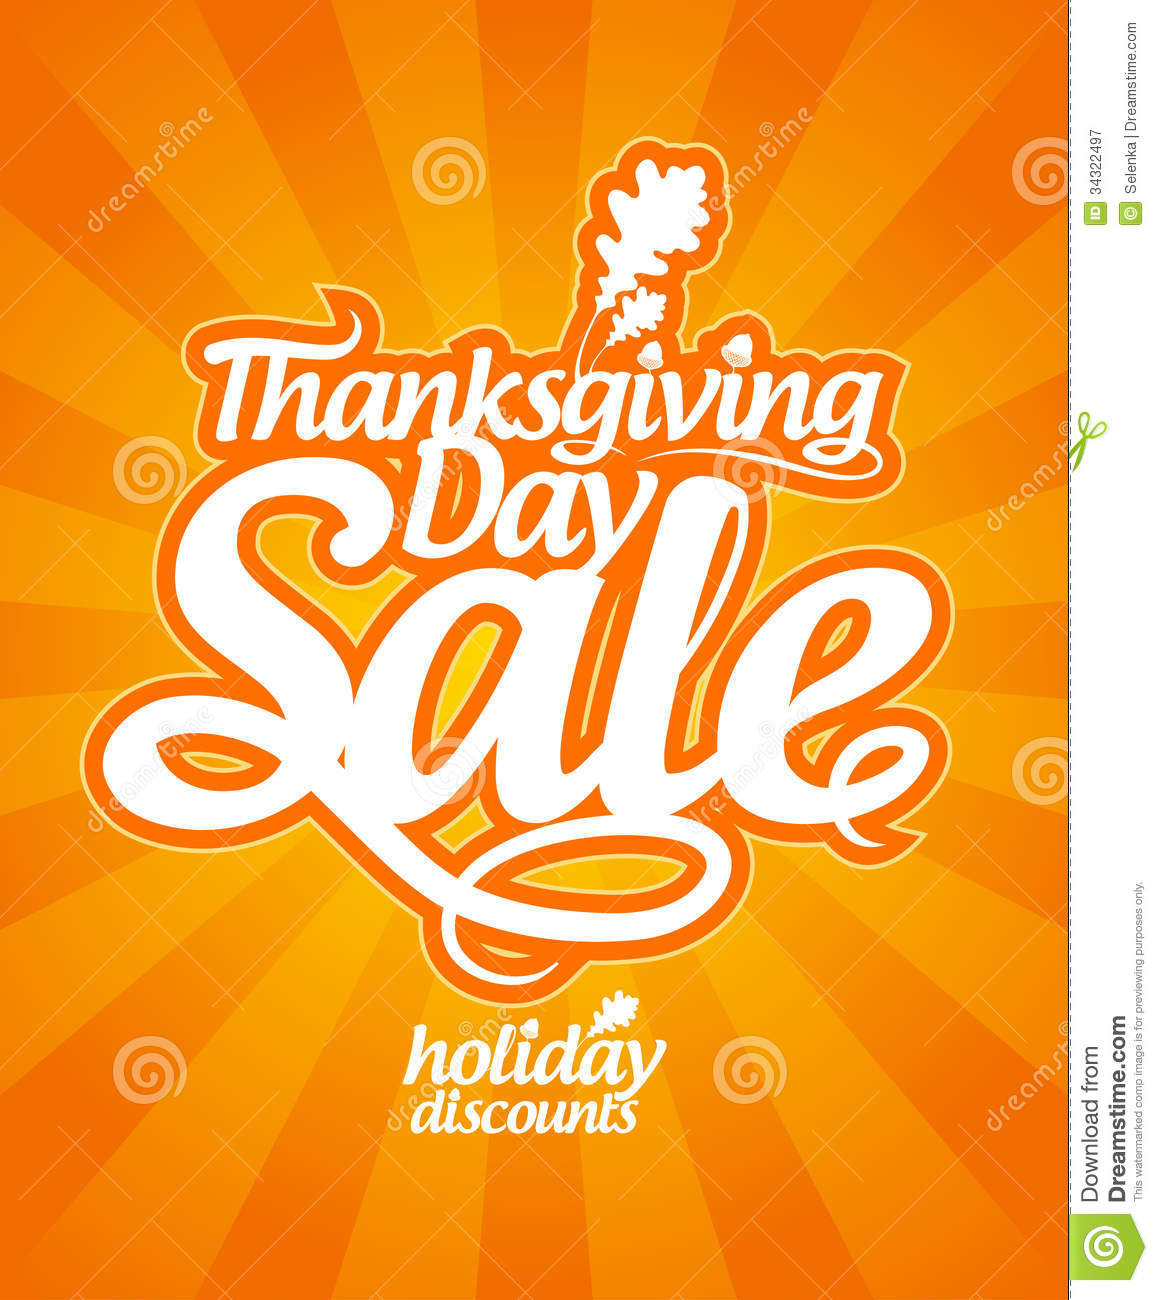 Turkey Sales For Thanksgiving
 Thanksgiving Day Sale Royalty Free Stock graphy